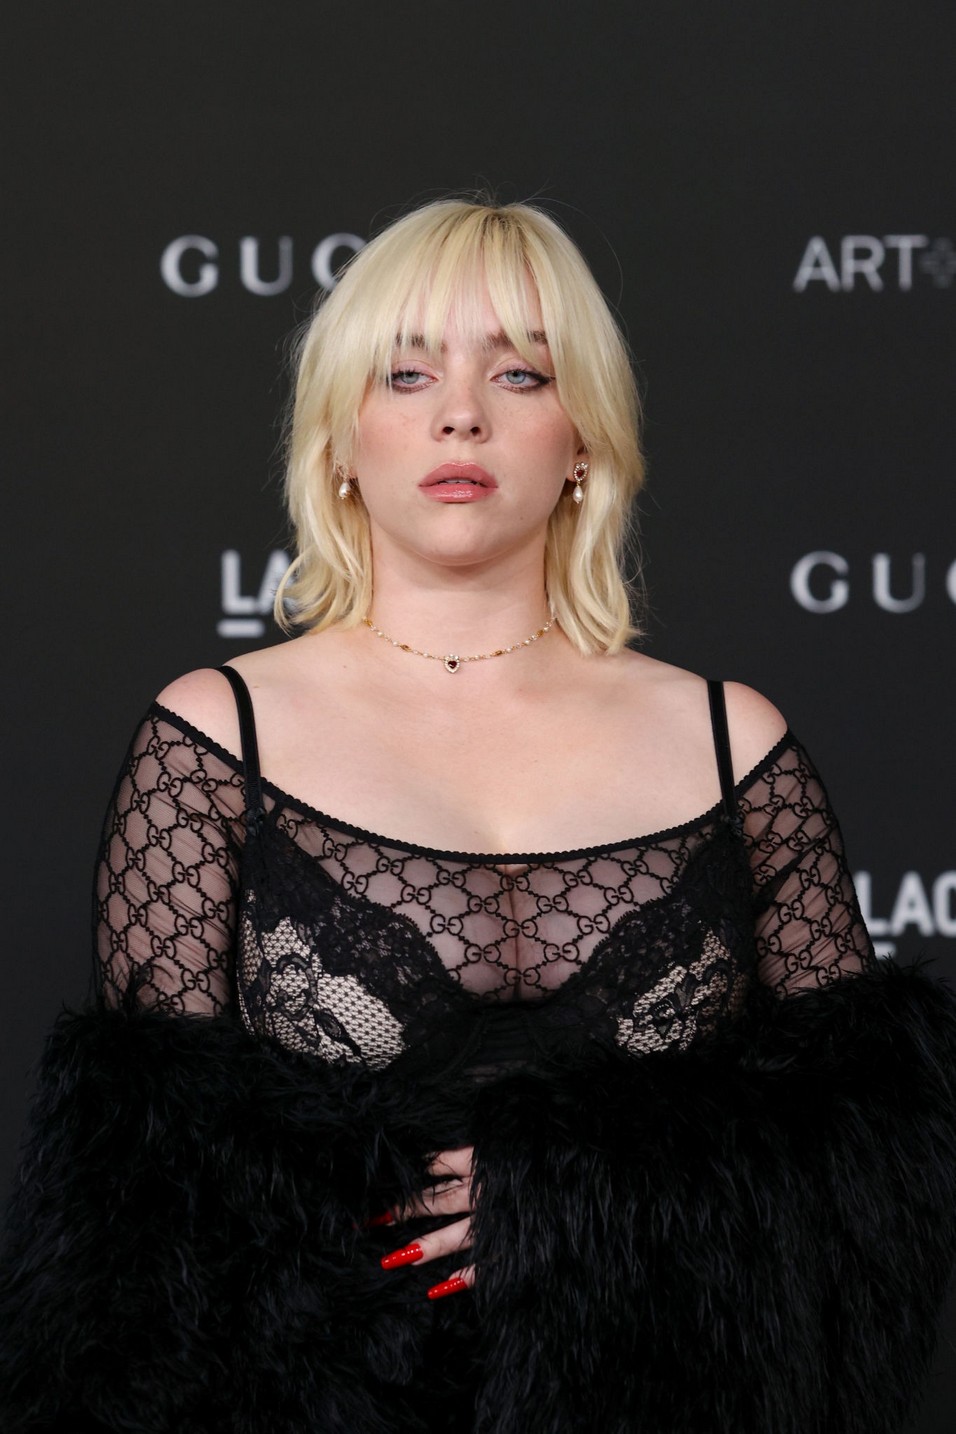 Billie Eilish Showed Her Tits For The First Time TheFappening.Pro 13 - Billie Eilish Hot In A Revealing Outfit (13 Photos)